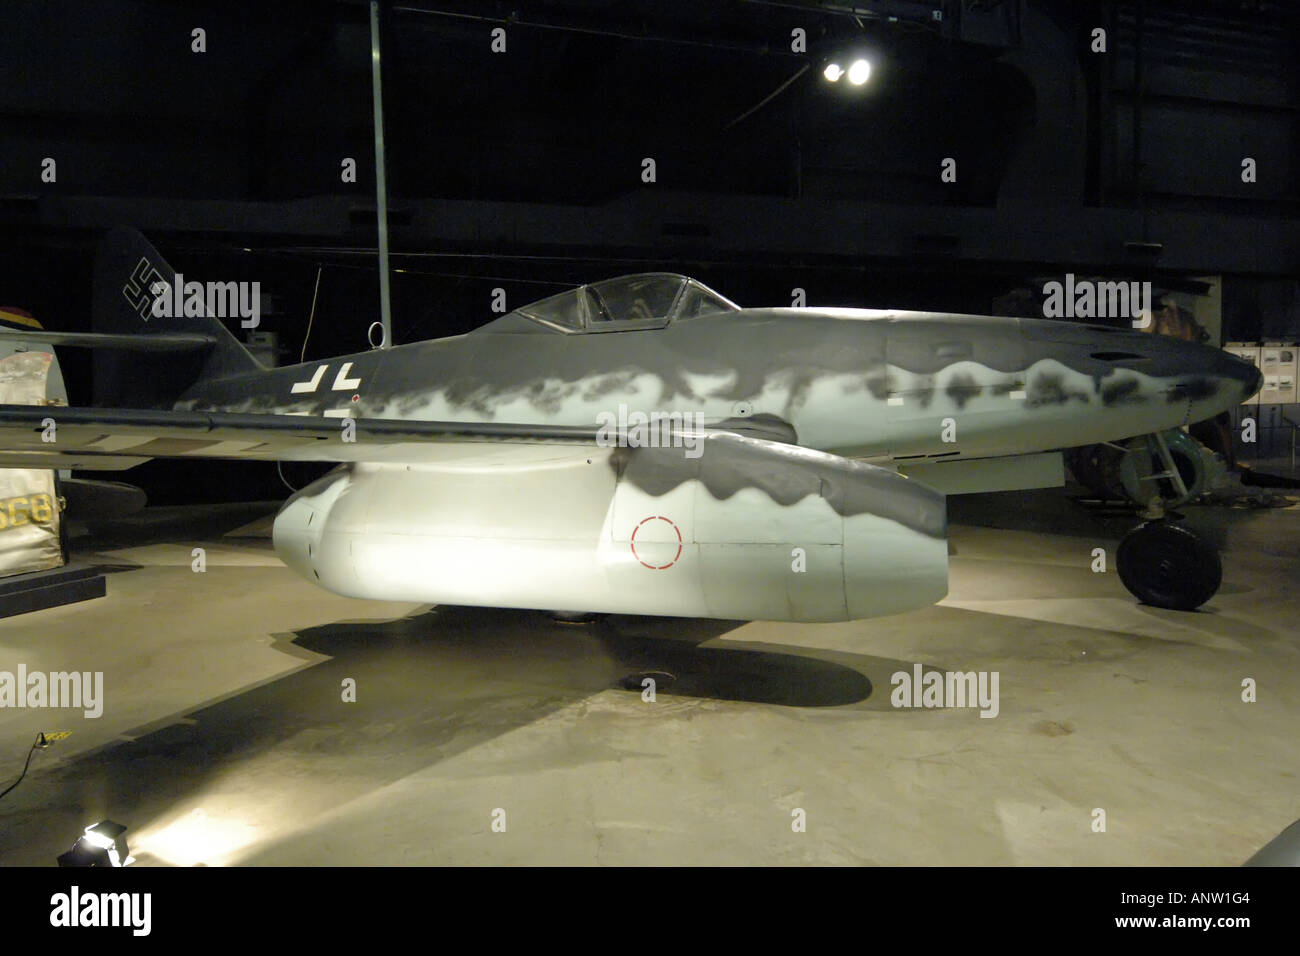 German Messerschmitt ME262 The first Operational jet fighter of WW2 at the Wright Patterson Air Force Museum in Dayton, Ohio. Stock Photo